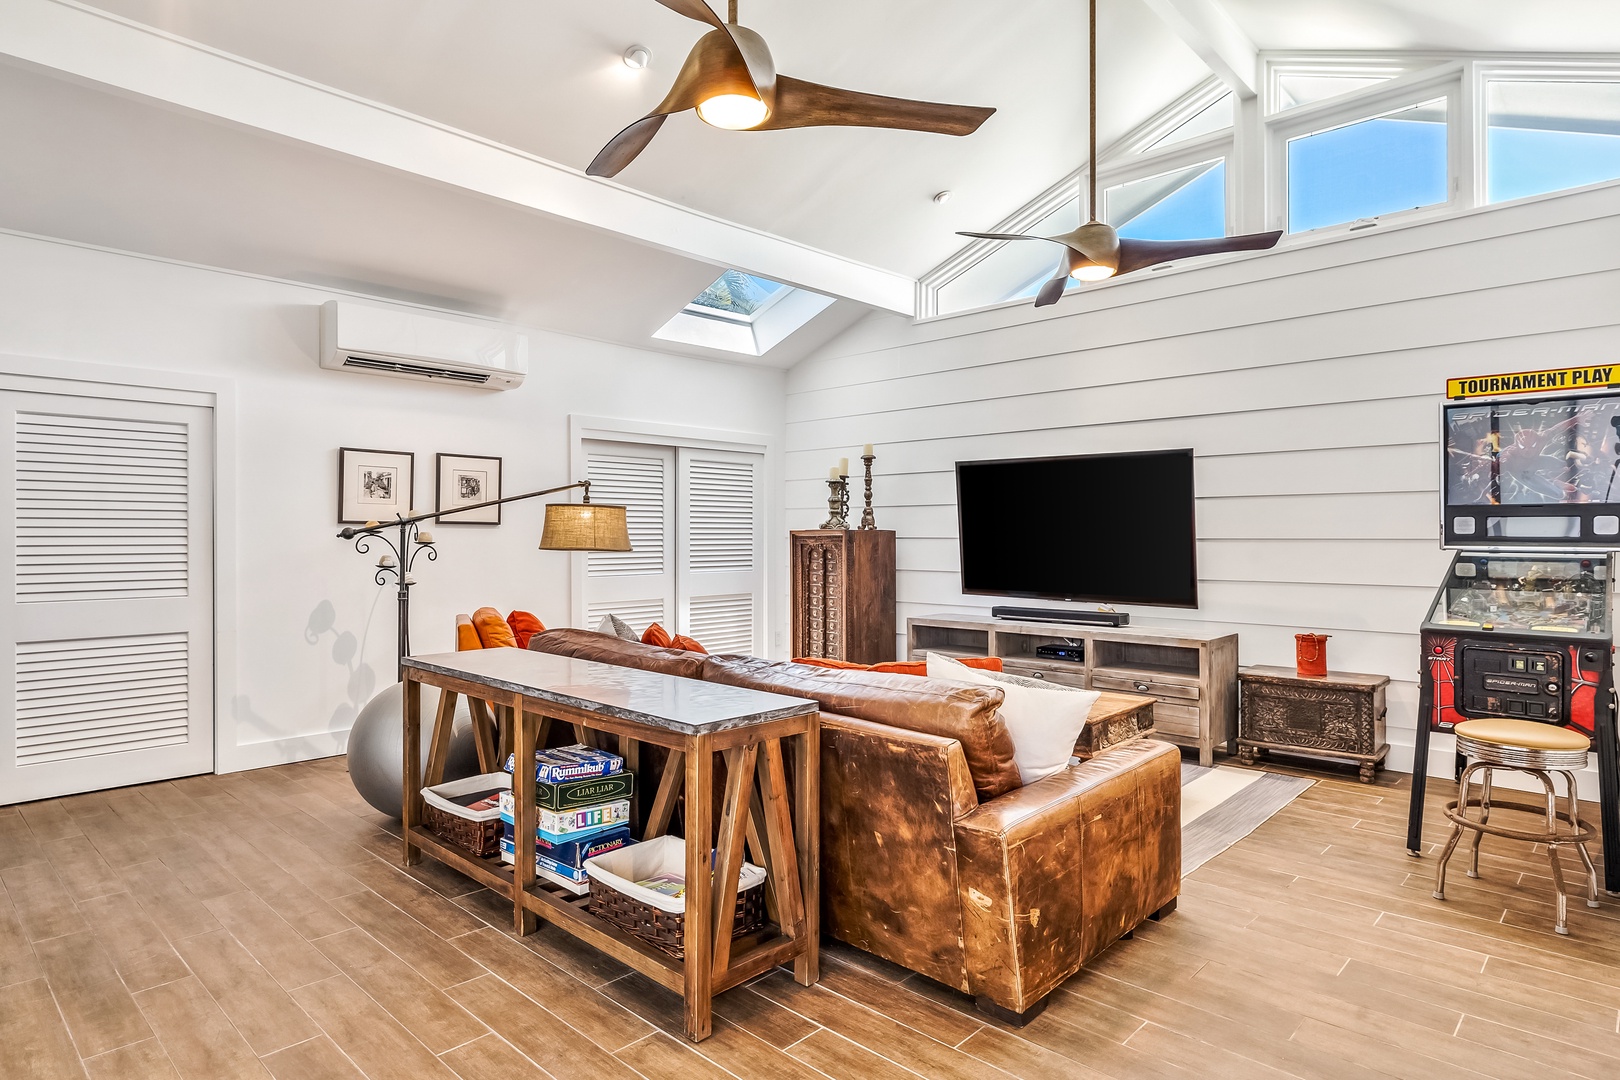 Kailua Vacation Rentals, Hale Ohana - The Guest Cottage living area is bright and lively